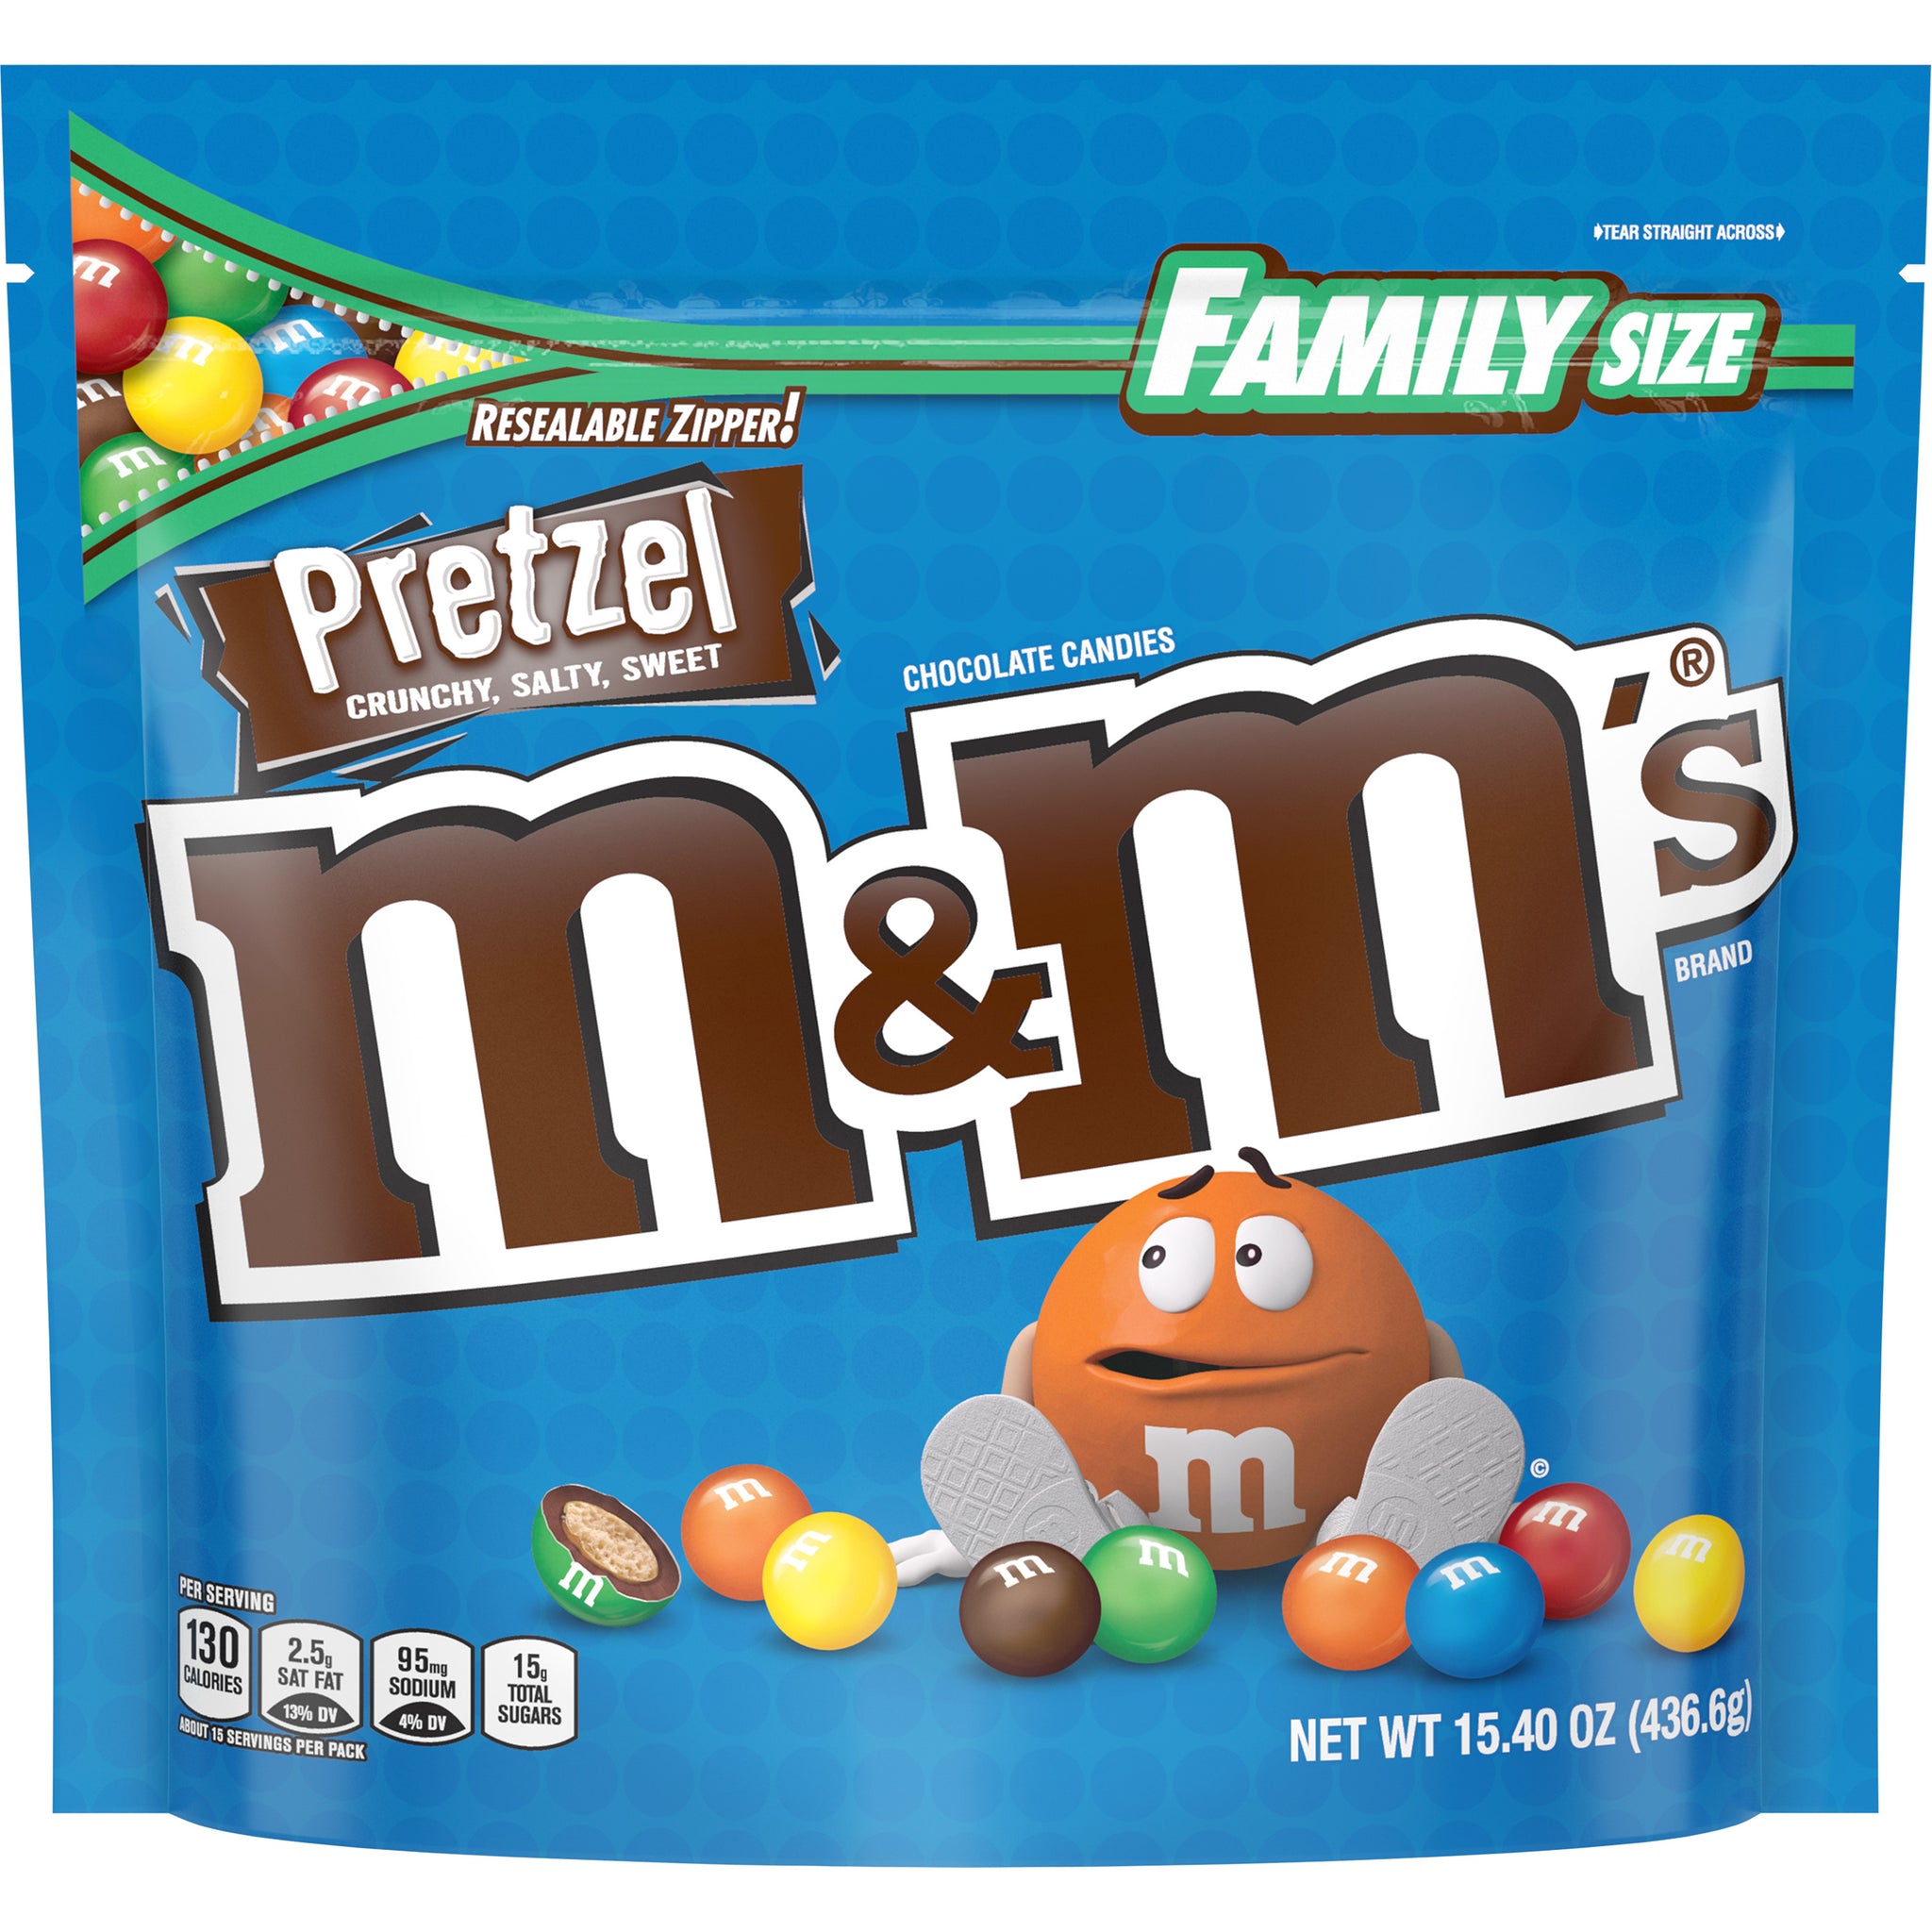 We Get Any Stock - The M&M's crispy chocolate bar is a deliciously